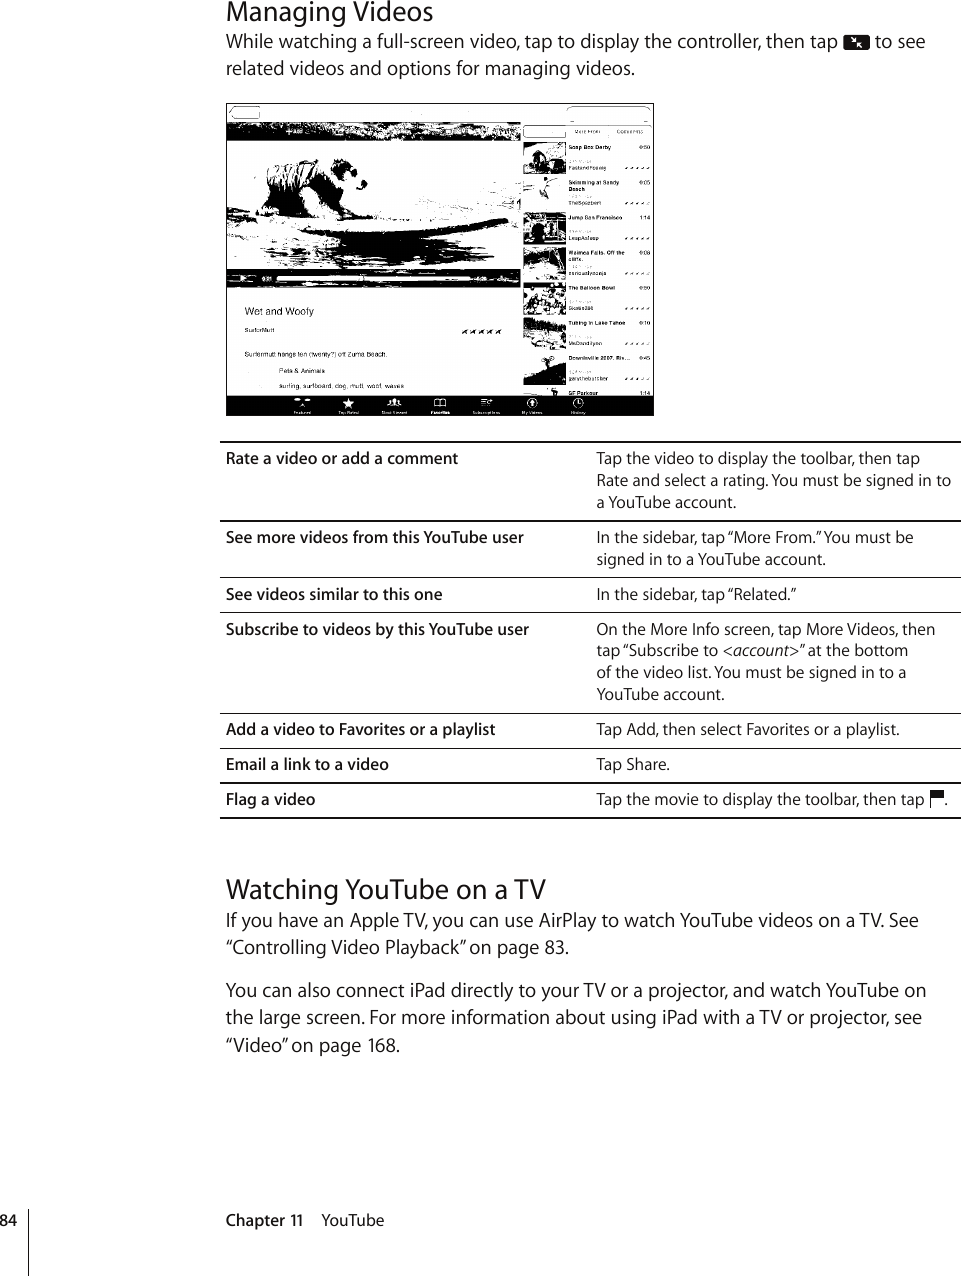 Managing VideosWhile watching a full-screen video, tap to display the controller, then tap   to see related videos and options for managing videos.Rate a video or add a comment Tap the video to display the toolbar, then tap Rate and select a rating. You must be signed in to a YouTube account.See more videos from this YouTube user In the sidebar, tap “More From.” You must be signed in to a YouTube account.See videos similar to this one In the sidebar, tap “Related.”Subscribe to videos by this YouTube user On the More Info screen, tap More Videos, then tap “Subscribe to &lt;account&gt;” at the bottom  of the video list. You must be signed in to a YouTube account.Add a video to Favorites or a playlist Tap Add, then select Favorites or a playlist.Email a link to a video Tap Share.Flag a video Tap the movie to display the toolbar, then tap  .Watching YouTube on a TVIf you have an Apple TV, you can use AirPlay to watch YouTube videos on a TV. See “Controlling Video Playback” on page 83.;QWECPCNUQEQPPGEVK2CFFKTGEVN[VQ[QWT68QTCRTQLGEVQTCPFYCVEJ;QW6WDGQPVJGNCTIGUETGGP(QTOQTGKPHQTOCVKQPCDQWVWUKPIK2CFYKVJC68QTRTQLGEVQTUGG“Video” on page 168.84 Chapter 11    YouTube